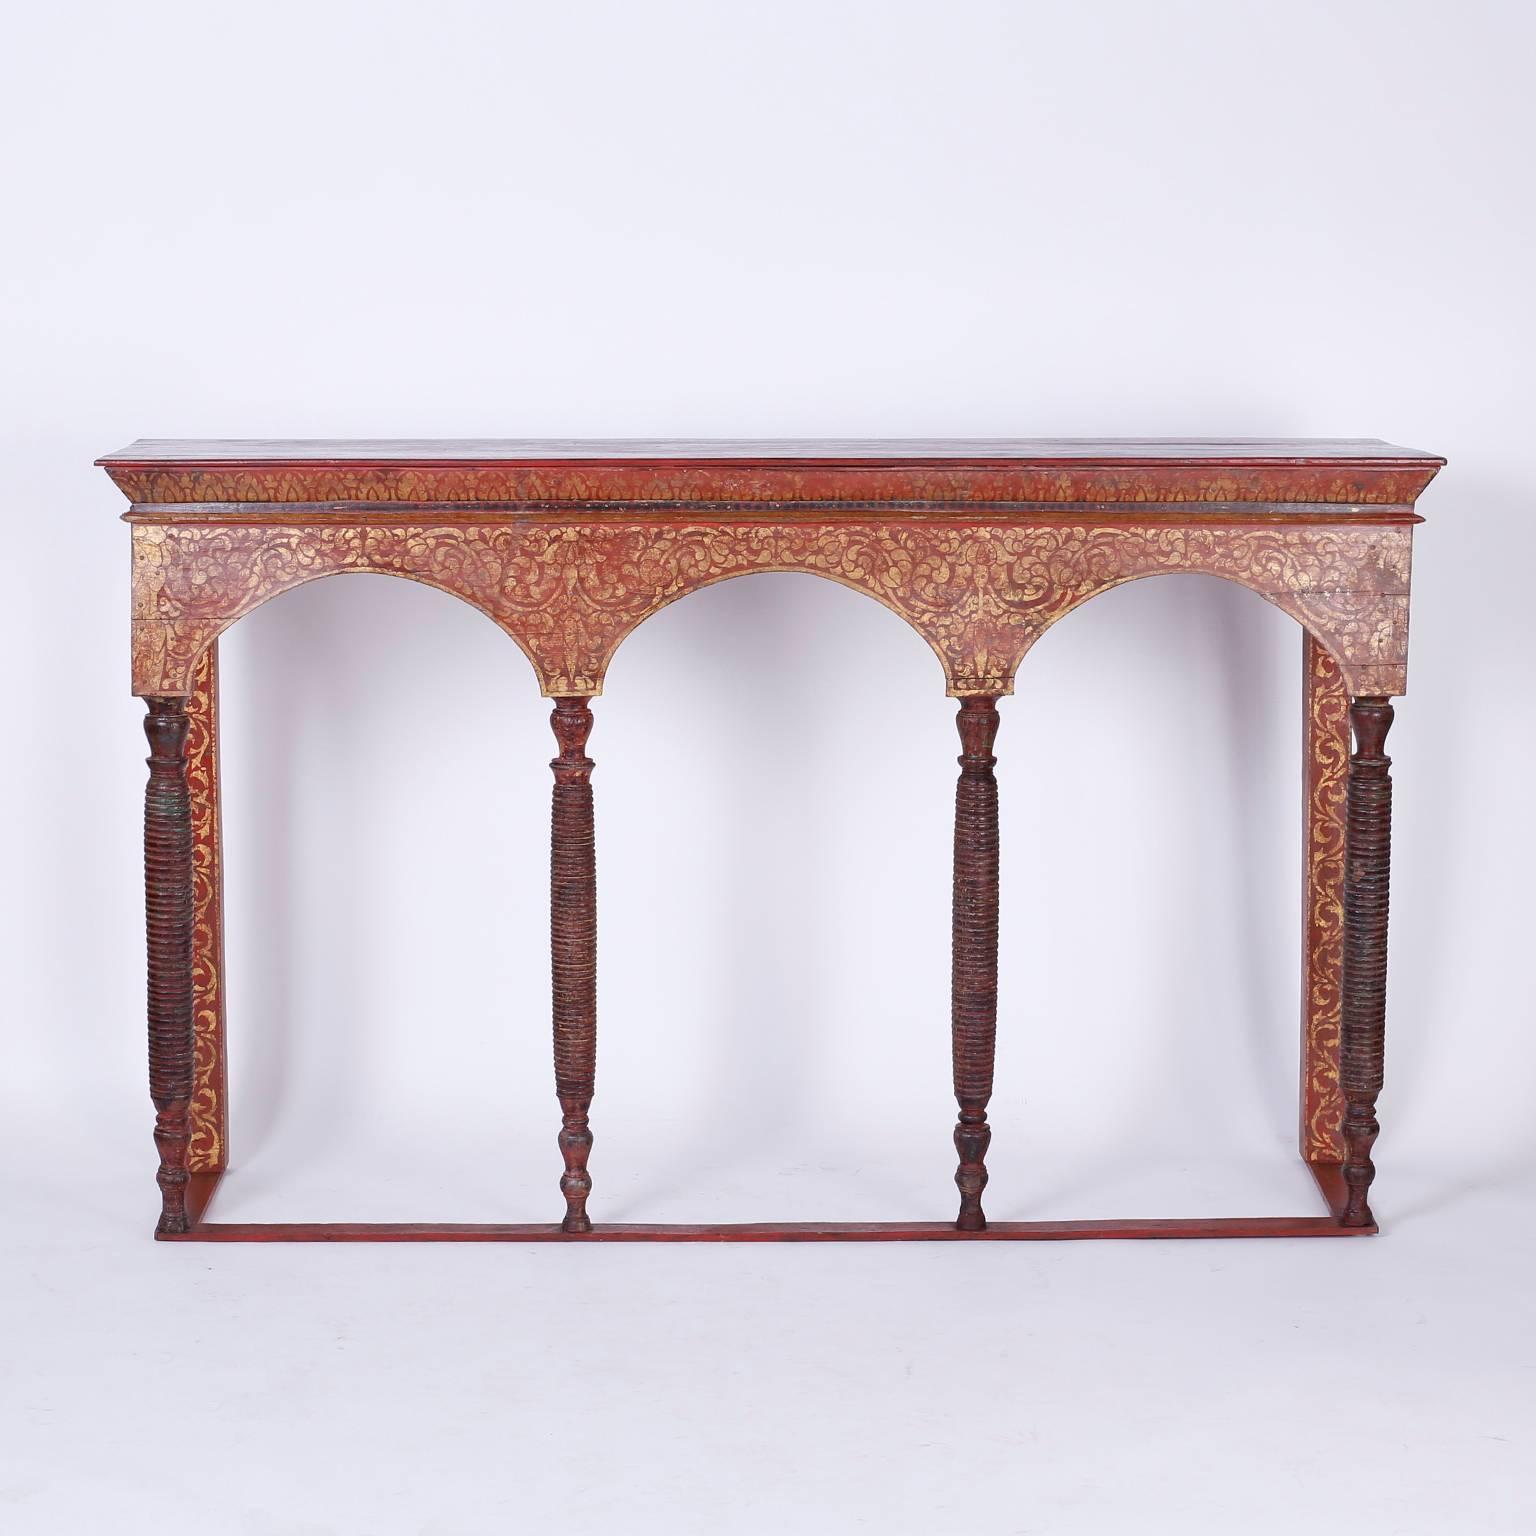 Antique Thai altar table or console with a strong architectural form. Crafted in wood with three arches supported by four turned wood columns. The table is painted in a rustic polychrome technique and
aged to perfection.